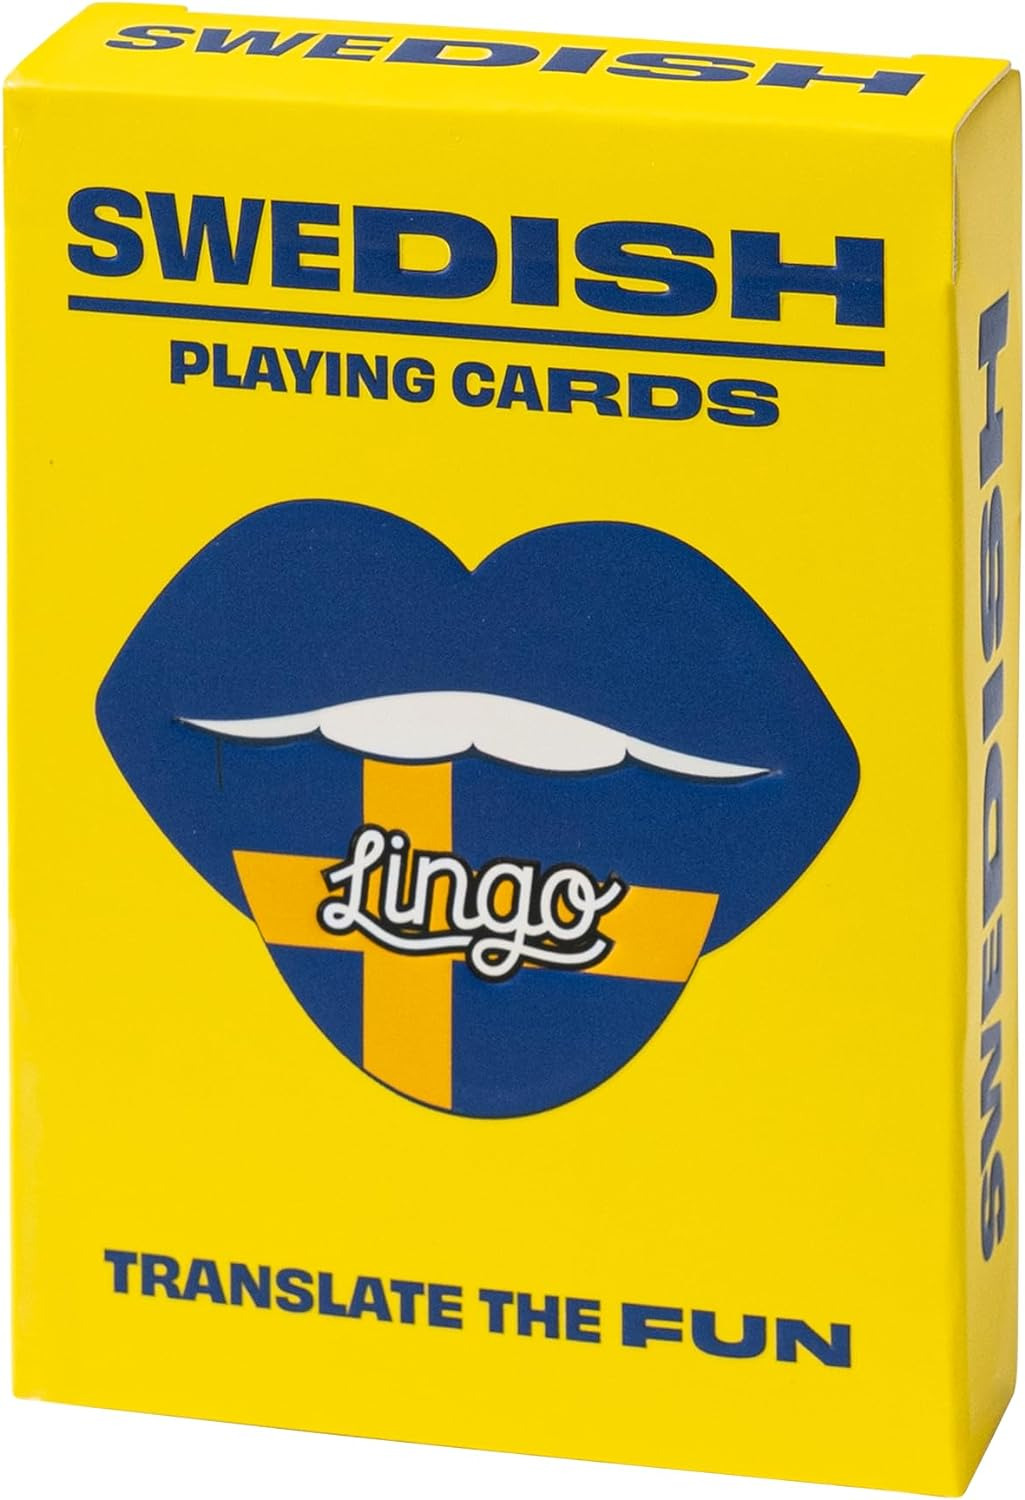 Swedish Playing Cards | Travel Flashcards | Learn Swedish Vocabulary in a Fun & 